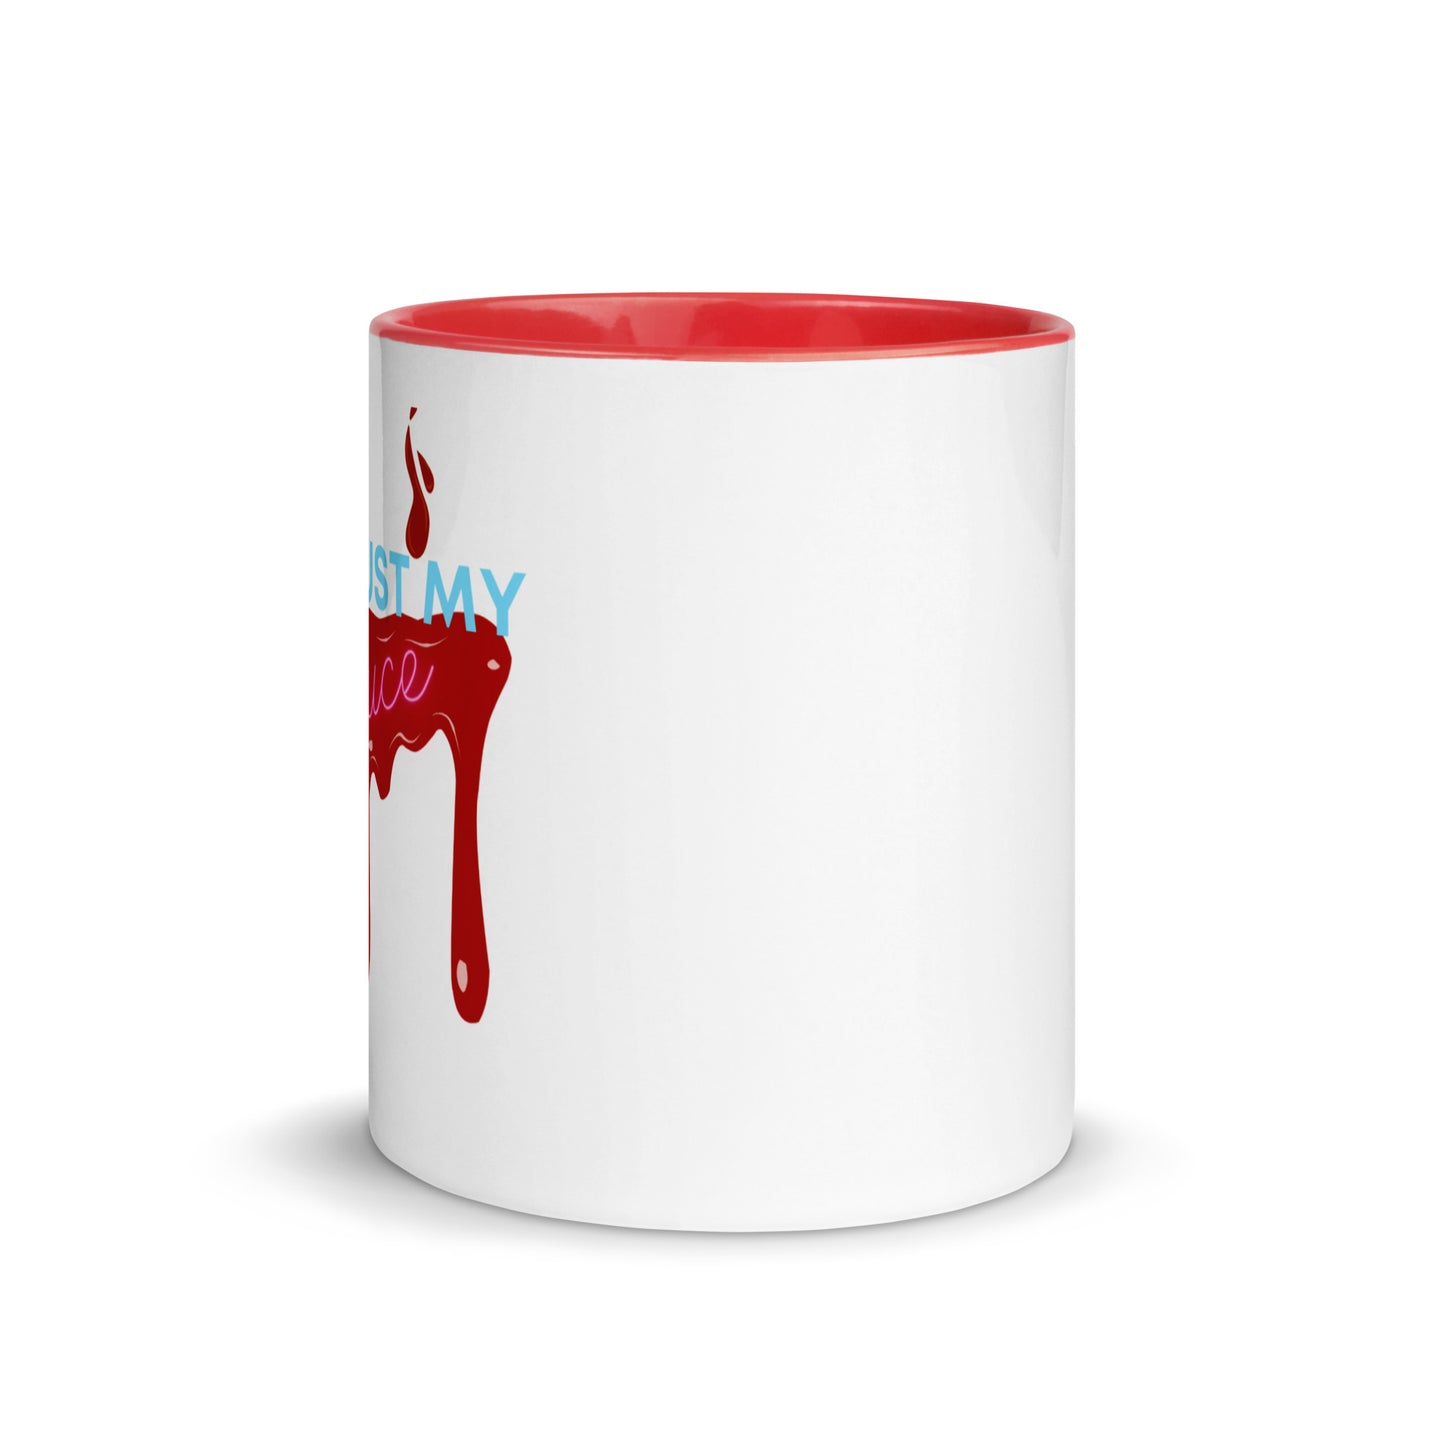 'It's Just my Sauce w/Drip' Mug with Color Inside